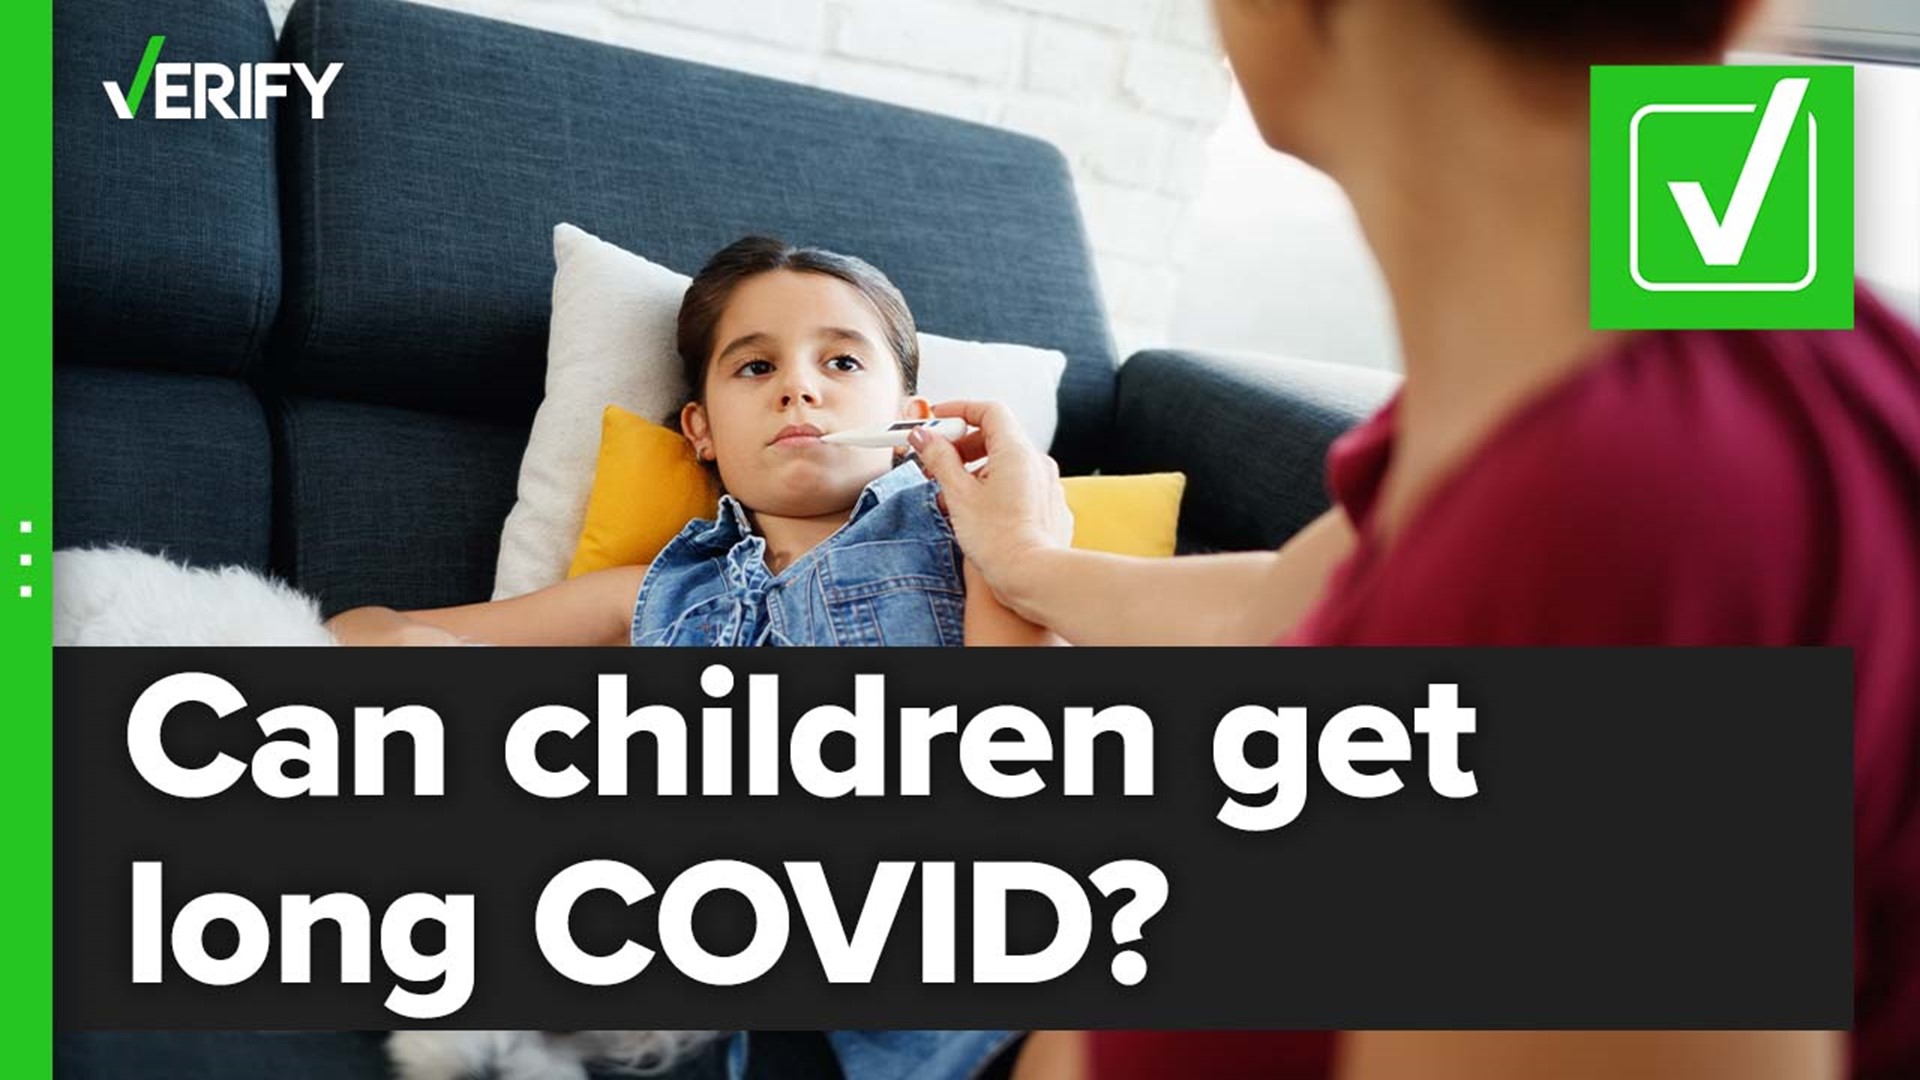 Long COVID, also called post-COVID, is a set of symptoms adults or children can experience weeks and even months after their COVID-19 infection is over.